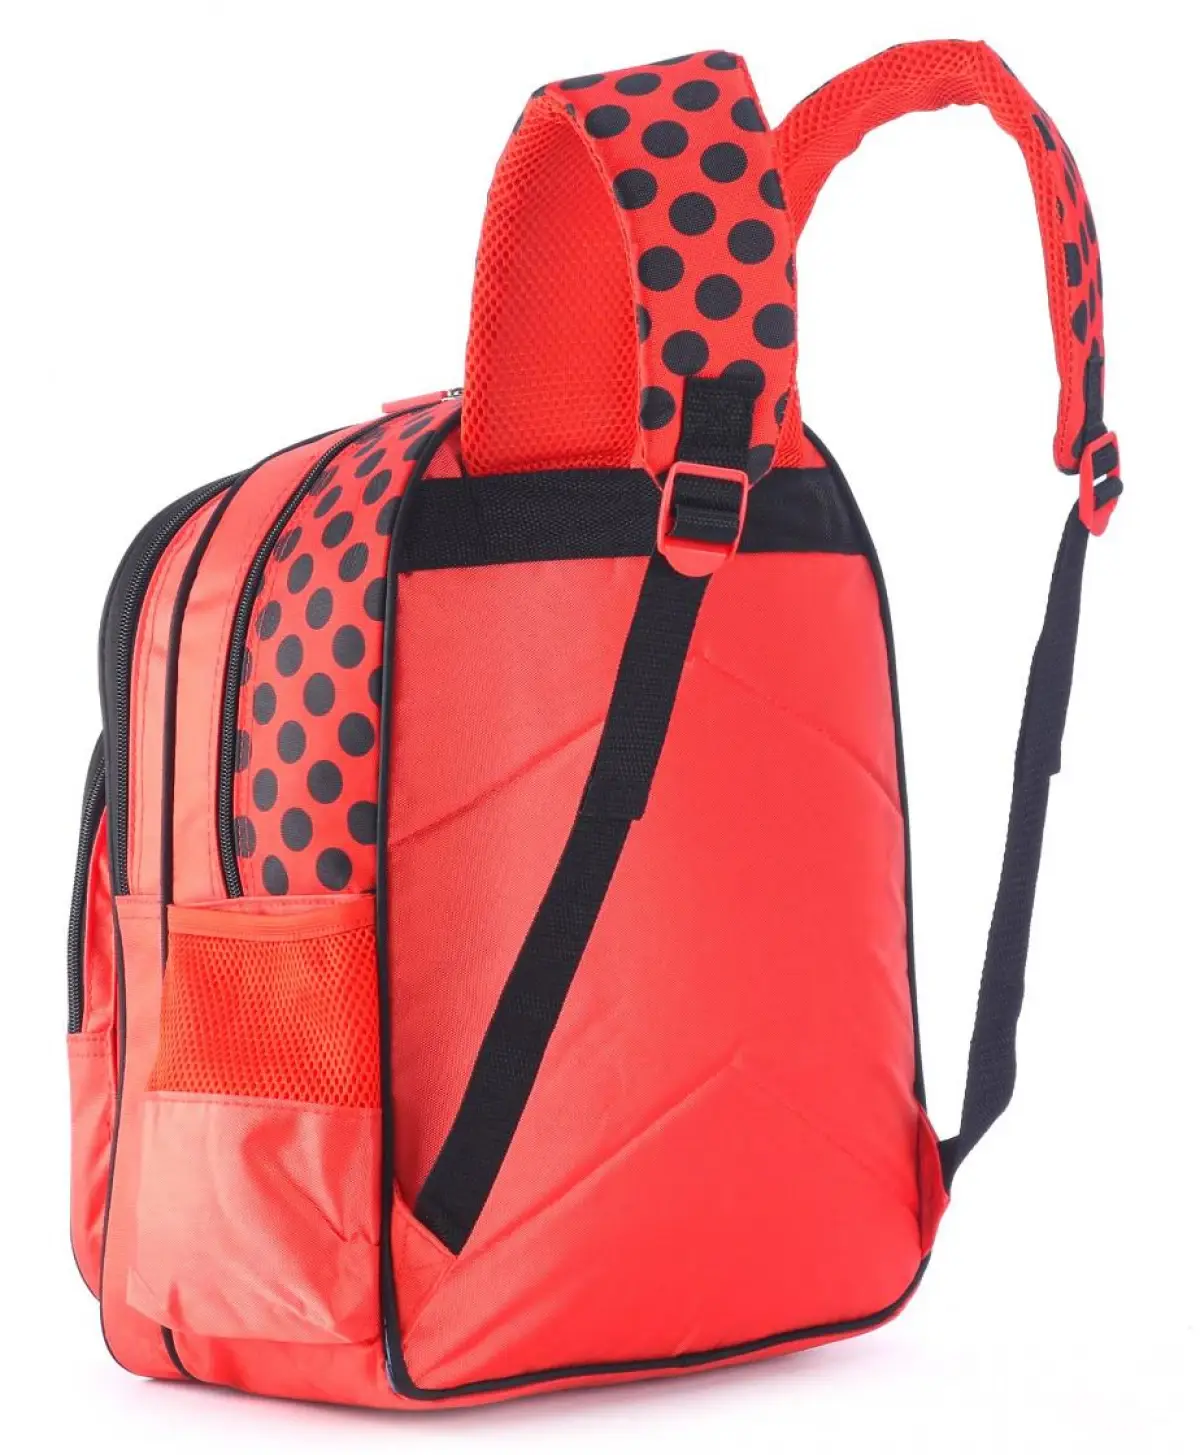 Striders 16 inches Miraculous Elevate Back-to-School with Our Stylish Miraculous School Bag Multicolour For Kids Ages 6Y+